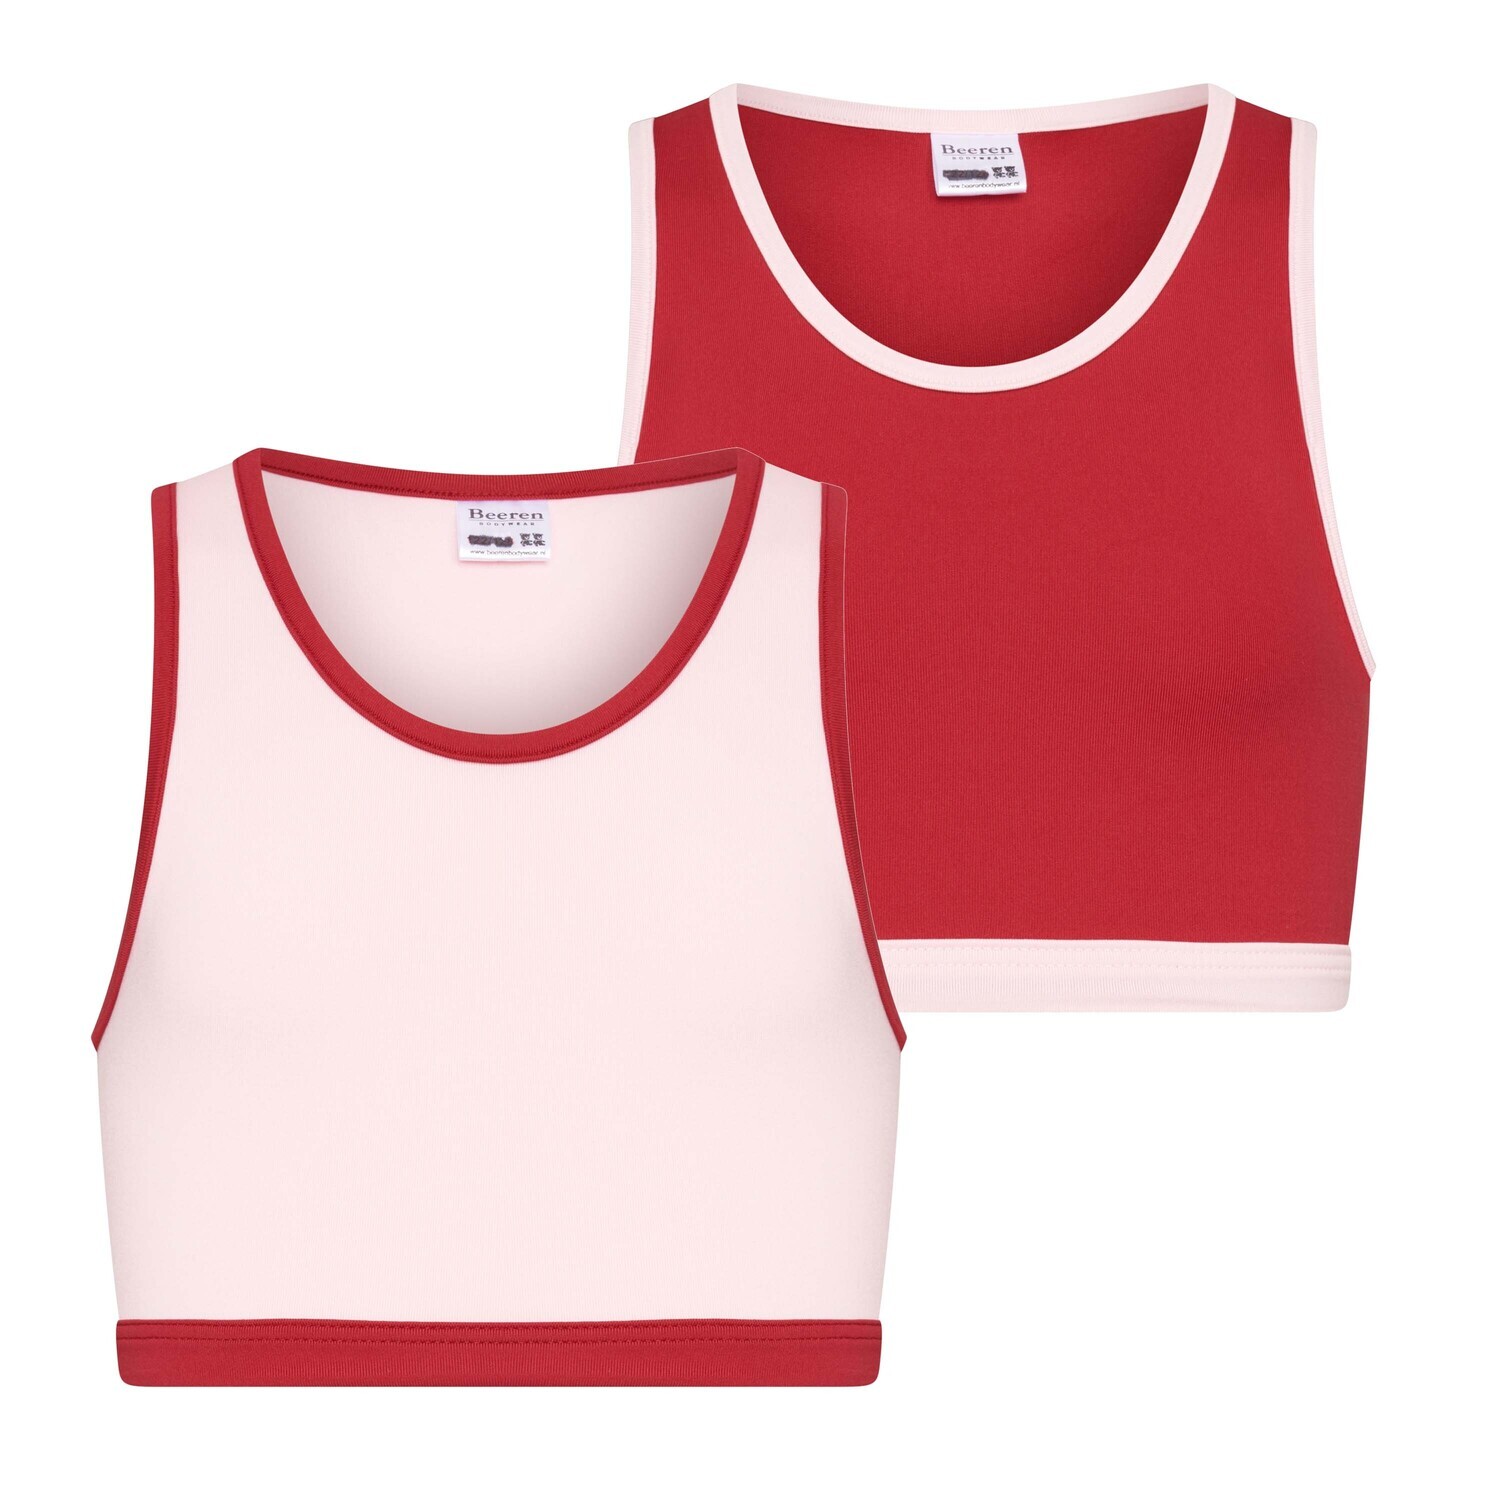 (08-251) Meisjes hesje Mix and Match 2-Pack rose/rood 134/140